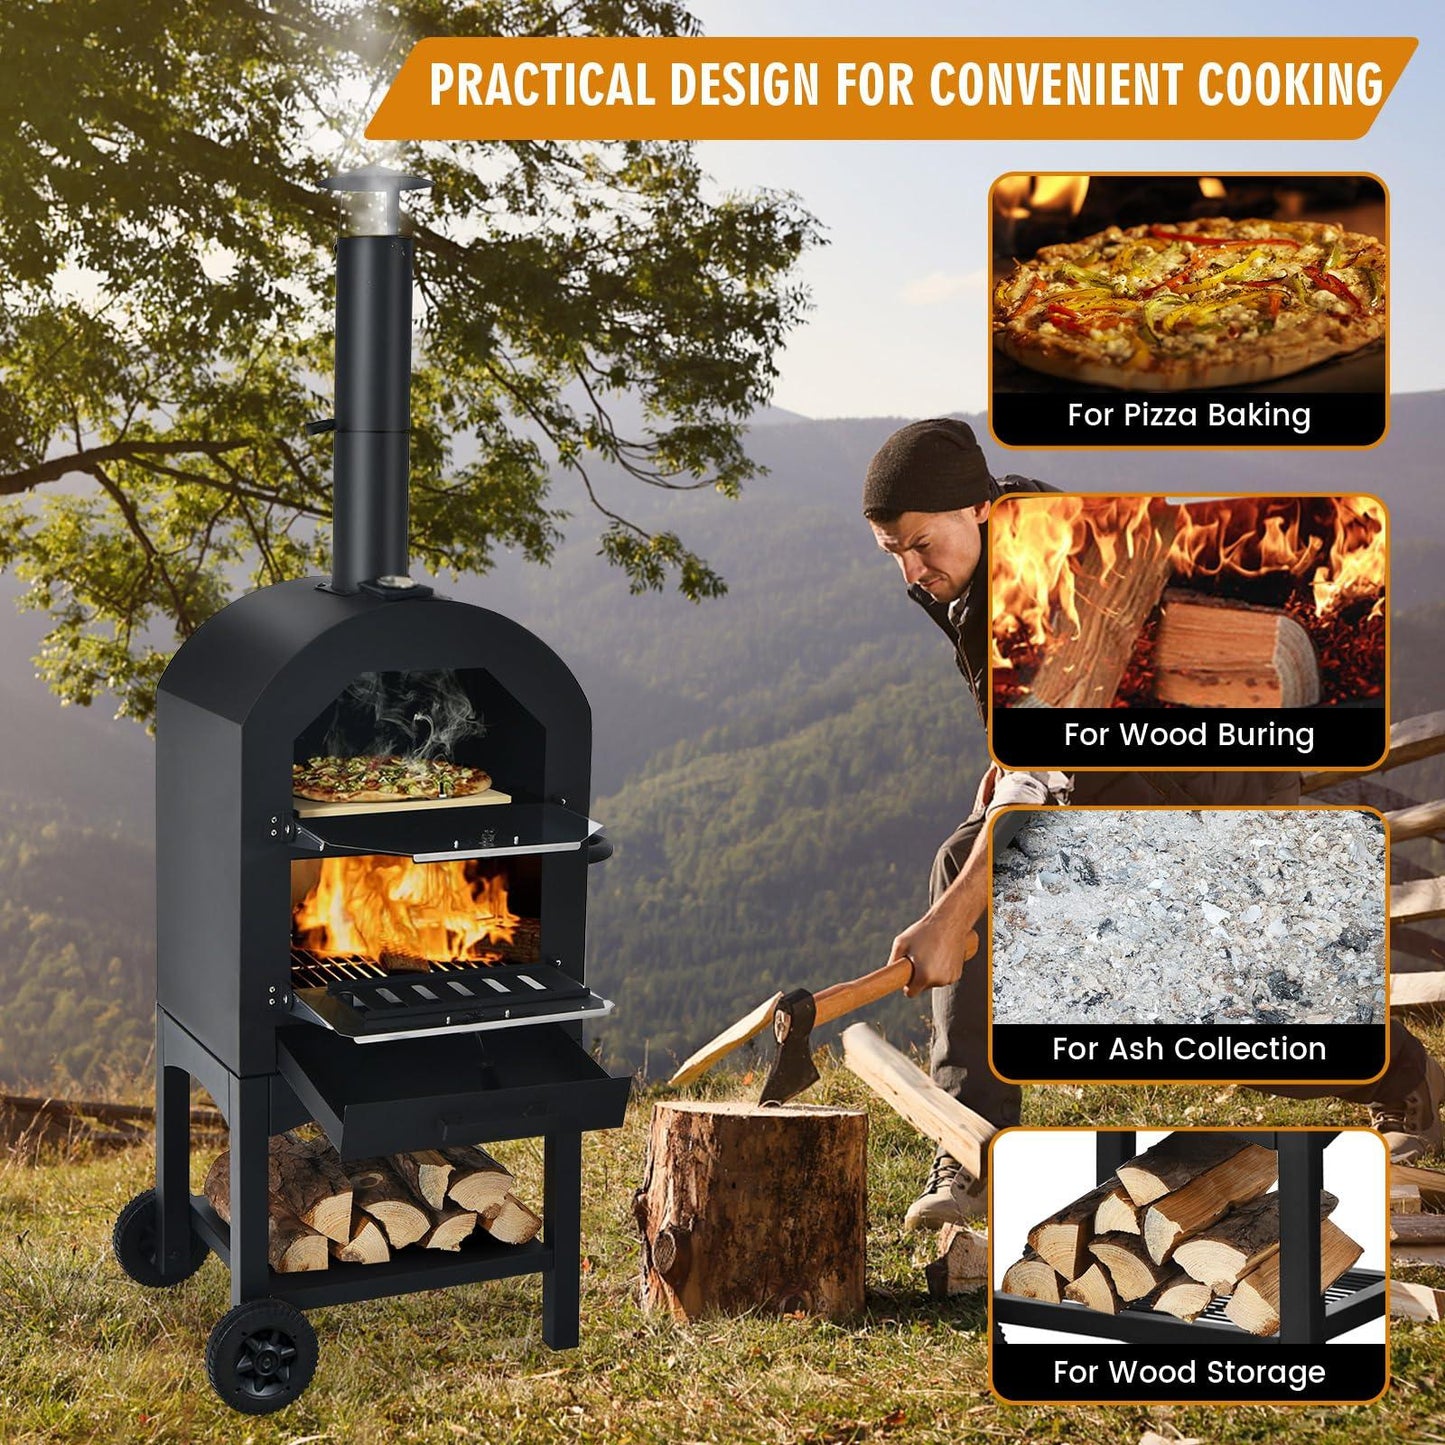 Happygrill Outdoor Pizza Oven Wood Fired Pizza Maker with 2 Wheels, Built-in Thermometer, Pizza Stone, Pizza Peel, Waterproof Cover, Portable Pizza Oven Heater for Barbecue Picnic Camping - CookCave